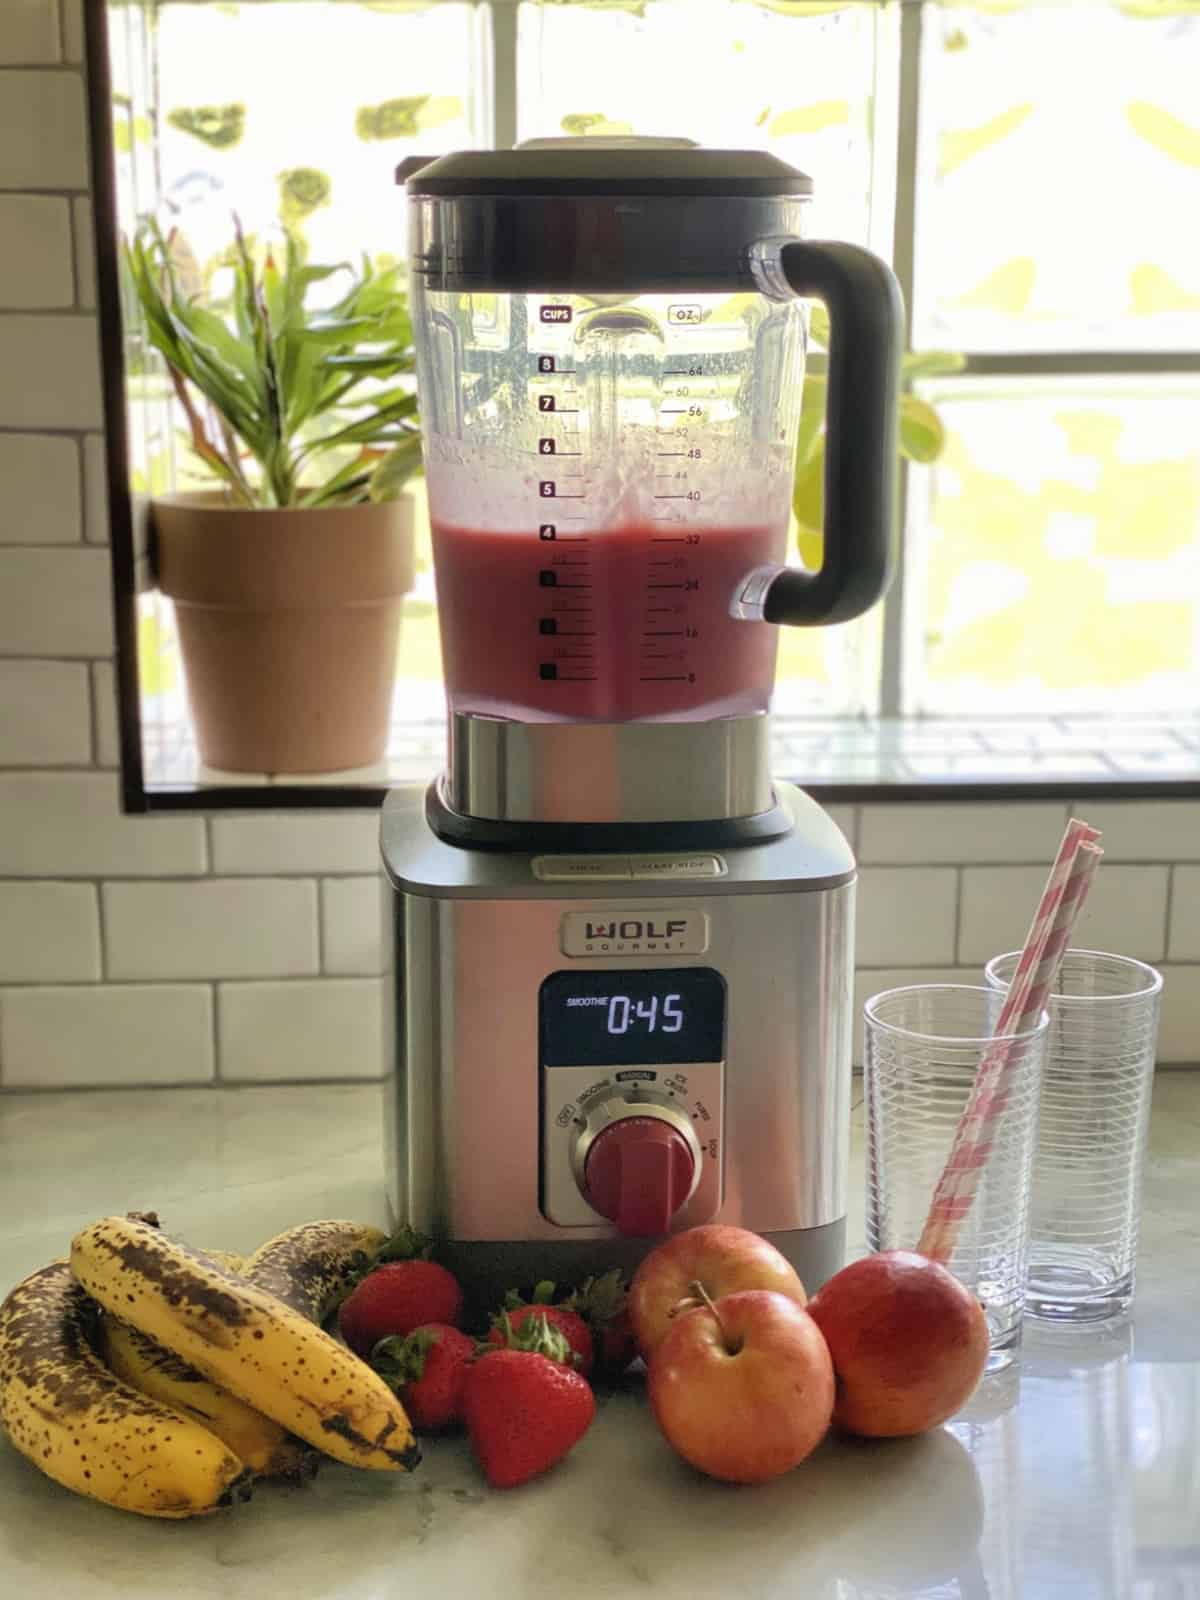 View of a blender with apples, strawberries, and bananas next to it.